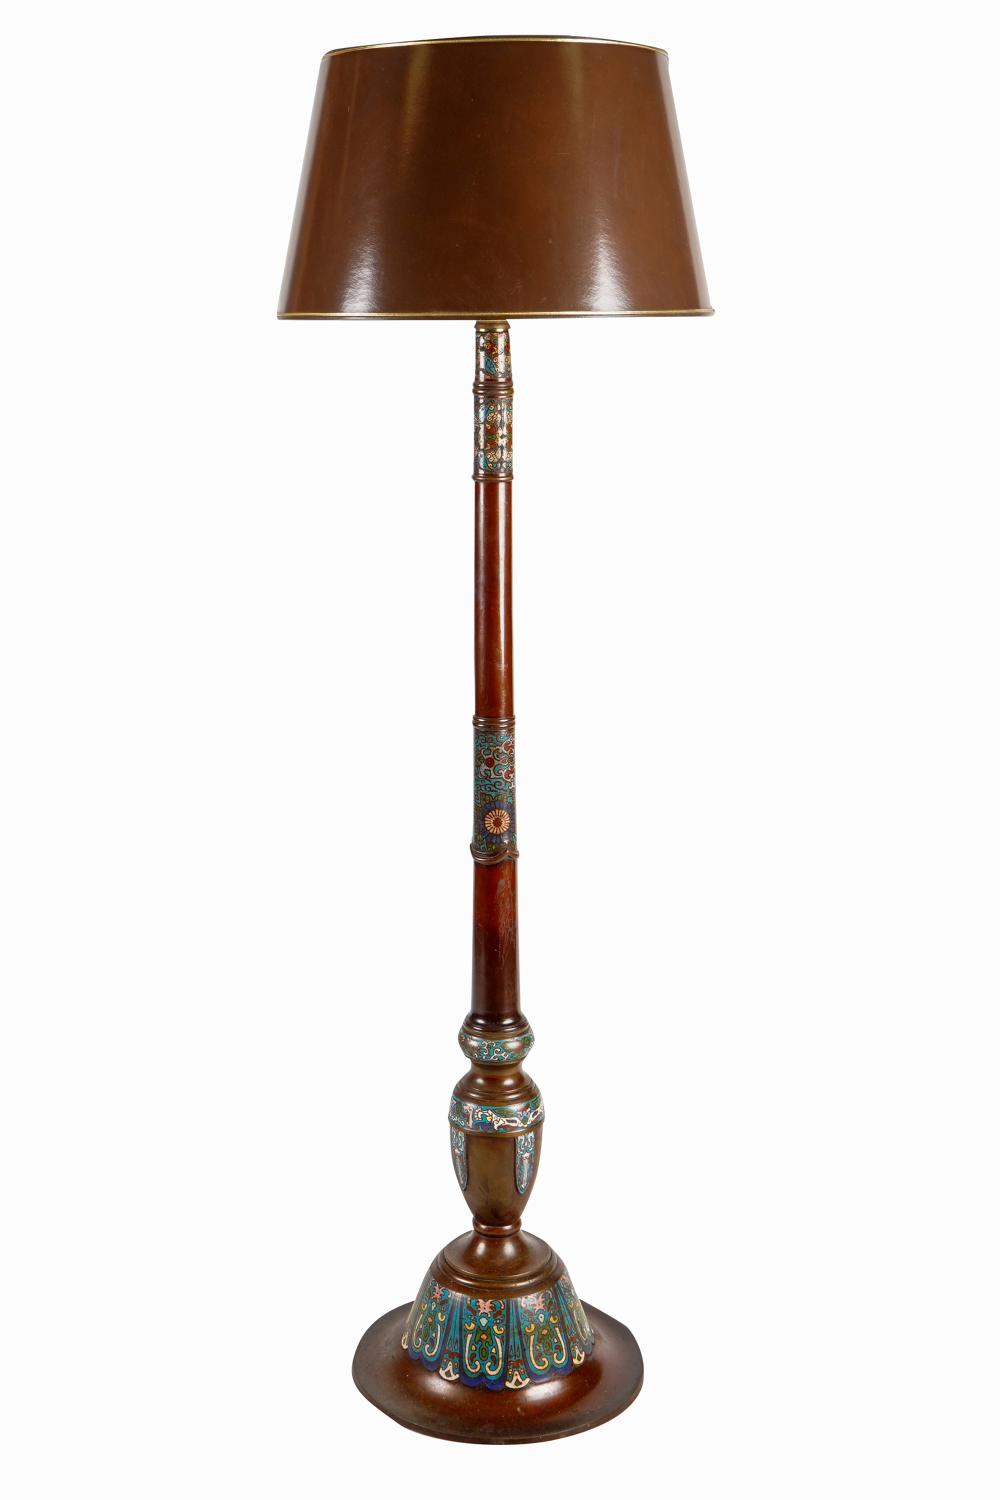 CHAMPLEVE TORCHIERE FLOOR LAMPwith 337844